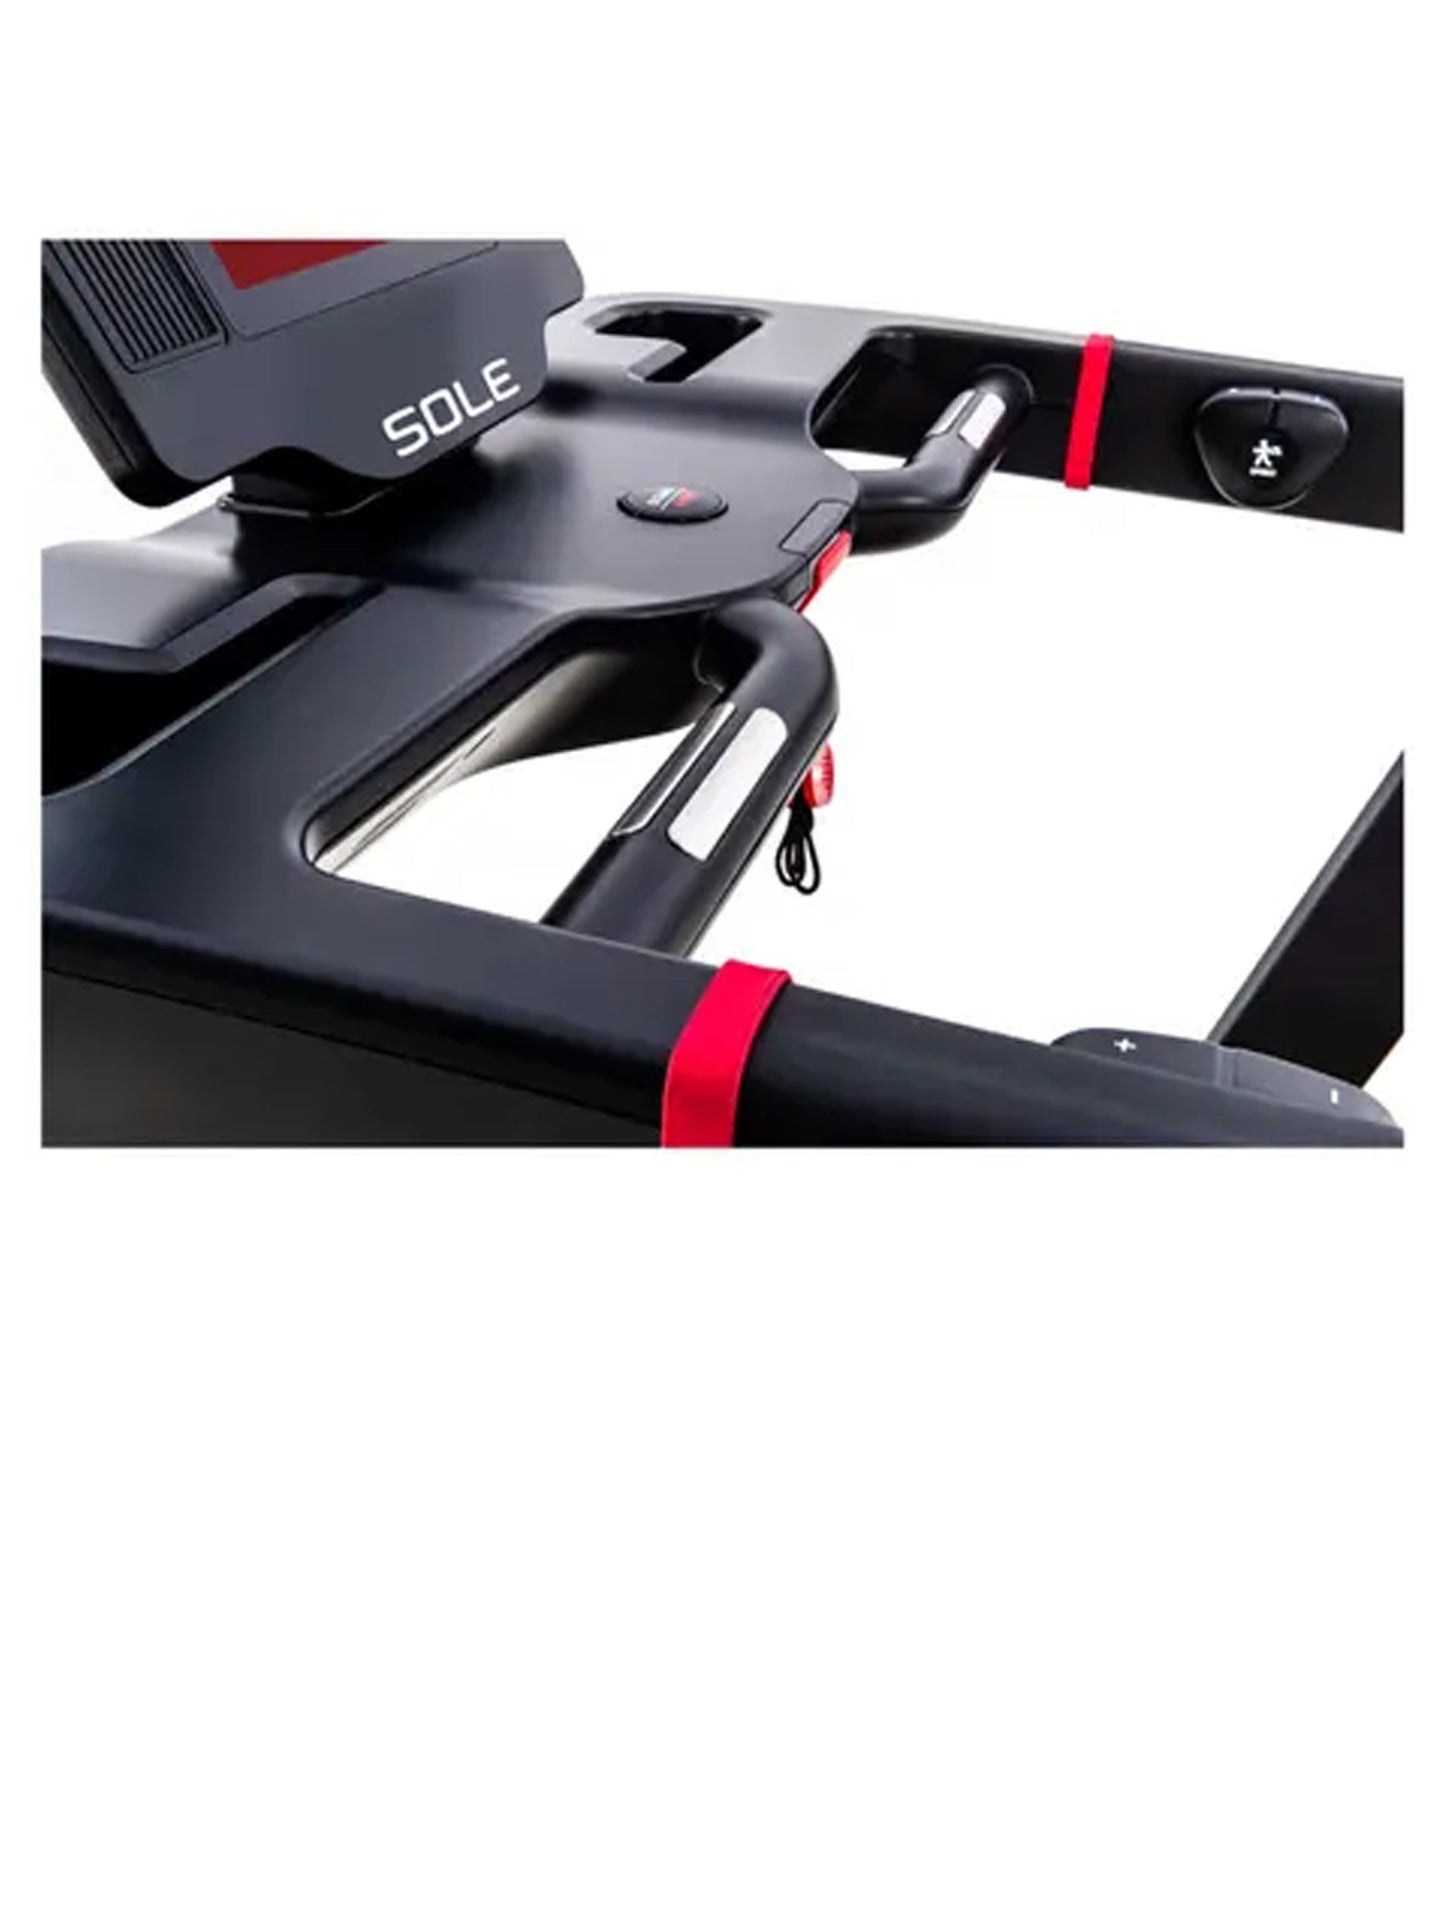 Sole Fitness: Buy Sole Fitness St90 Treadmill Online at Affordable Prices in Saudi Arabia